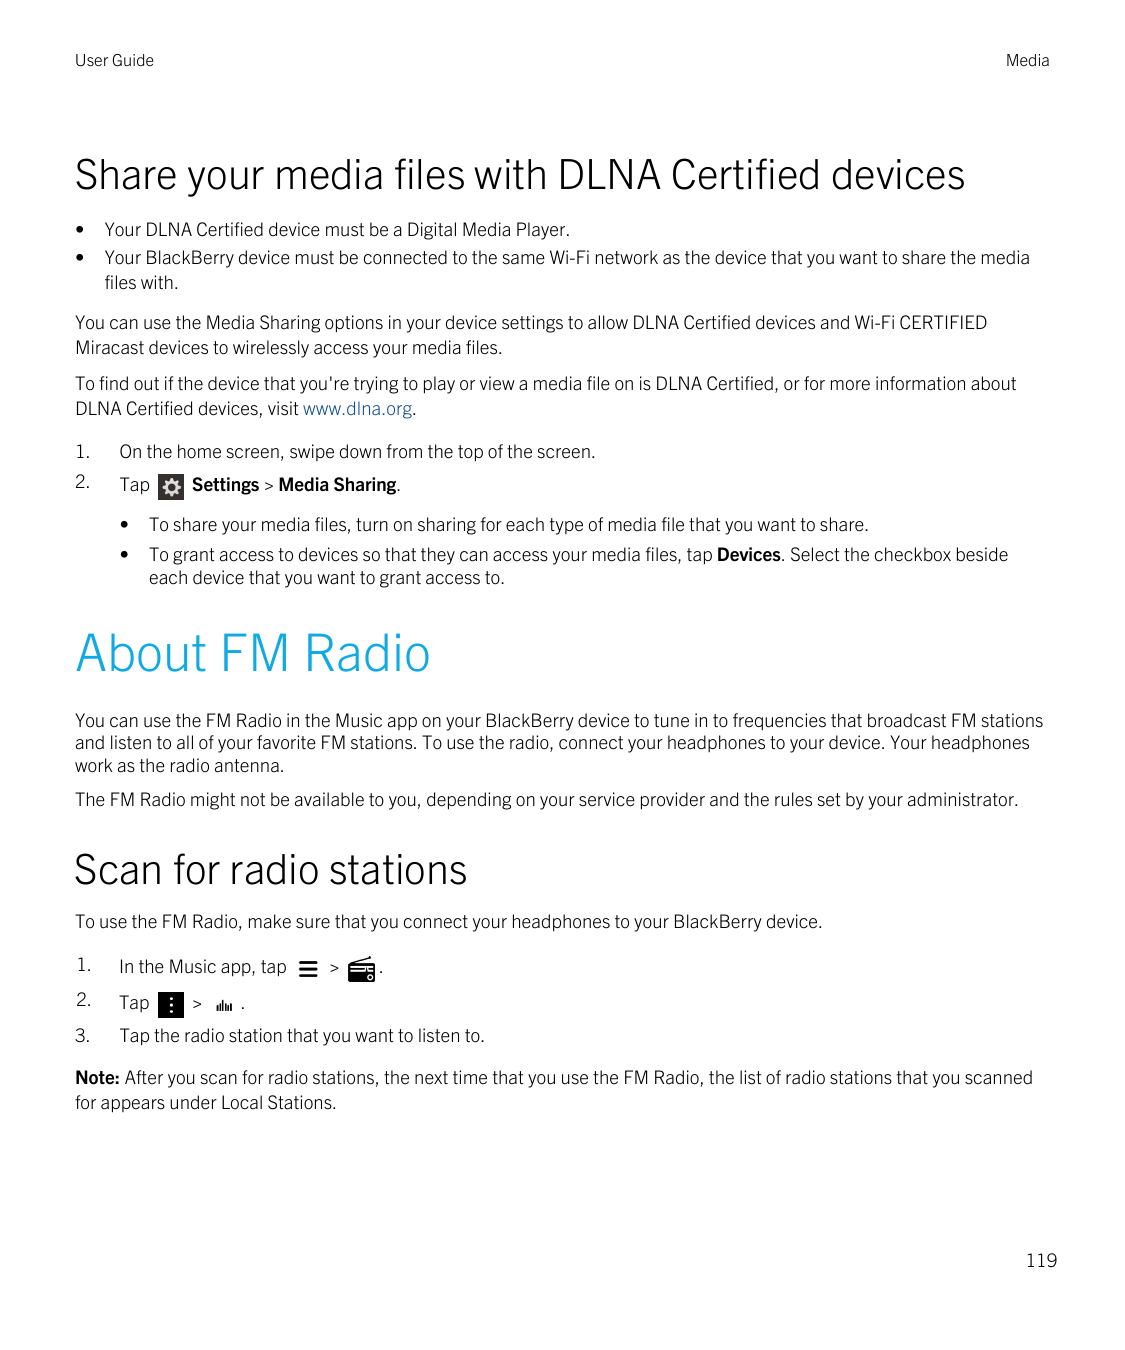 User GuideMediaShare your media files with DLNA Certified devices••Your DLNA Certified device must be a Digital Media Player.You